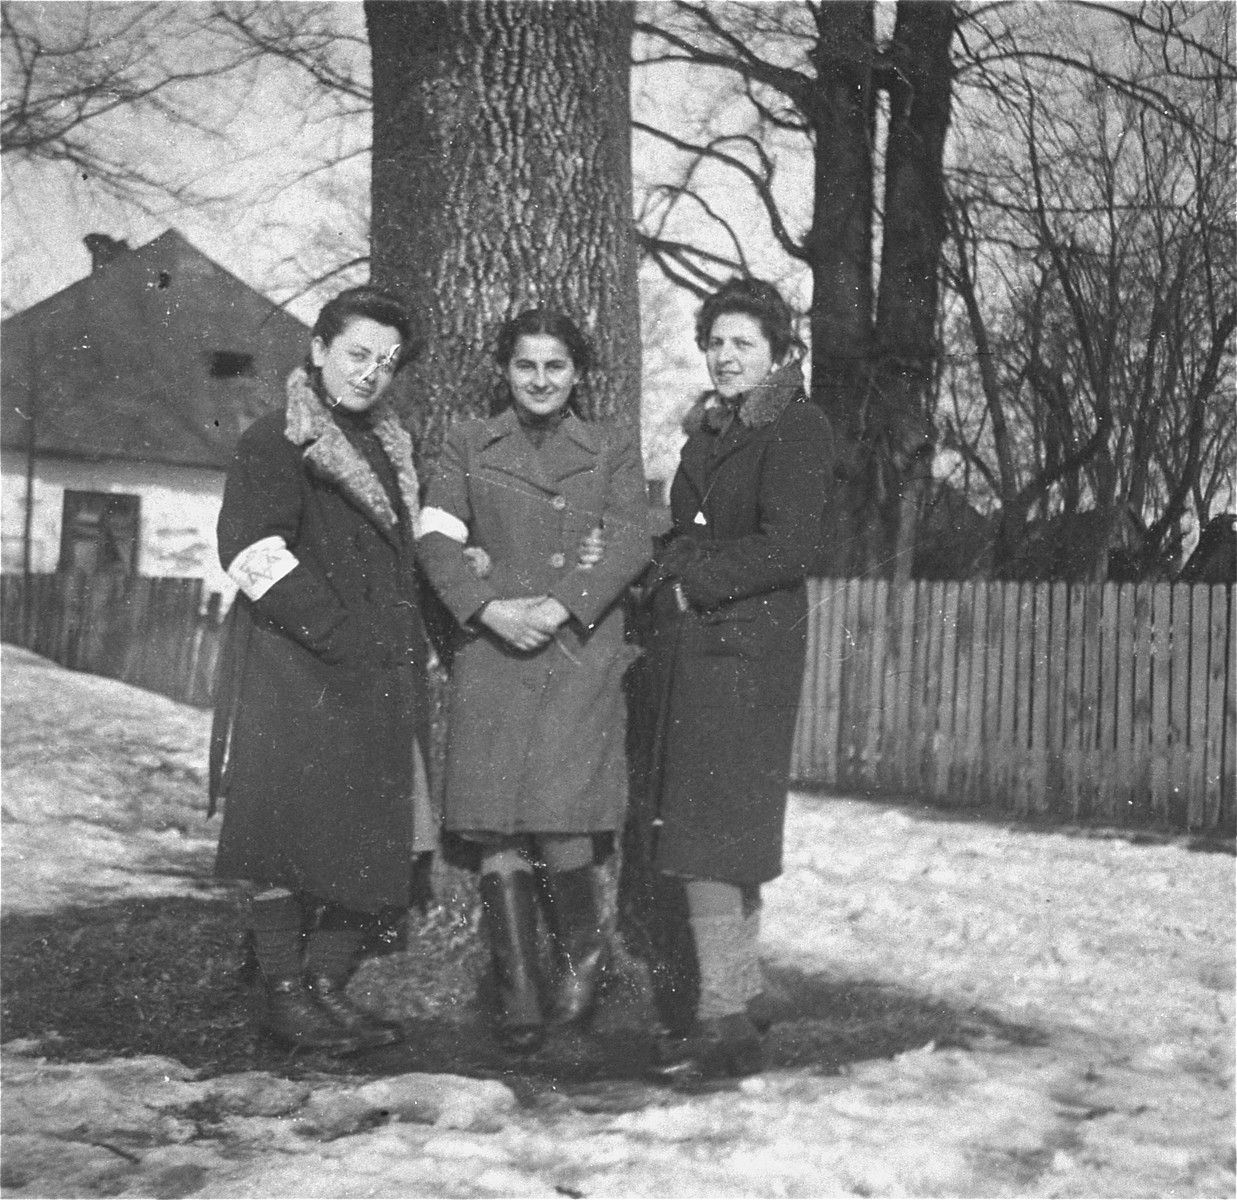 Three young women pose in front of a tree in the Kolbuszowa ghetto.  

Pictured at the right is Niunia Notowicz.